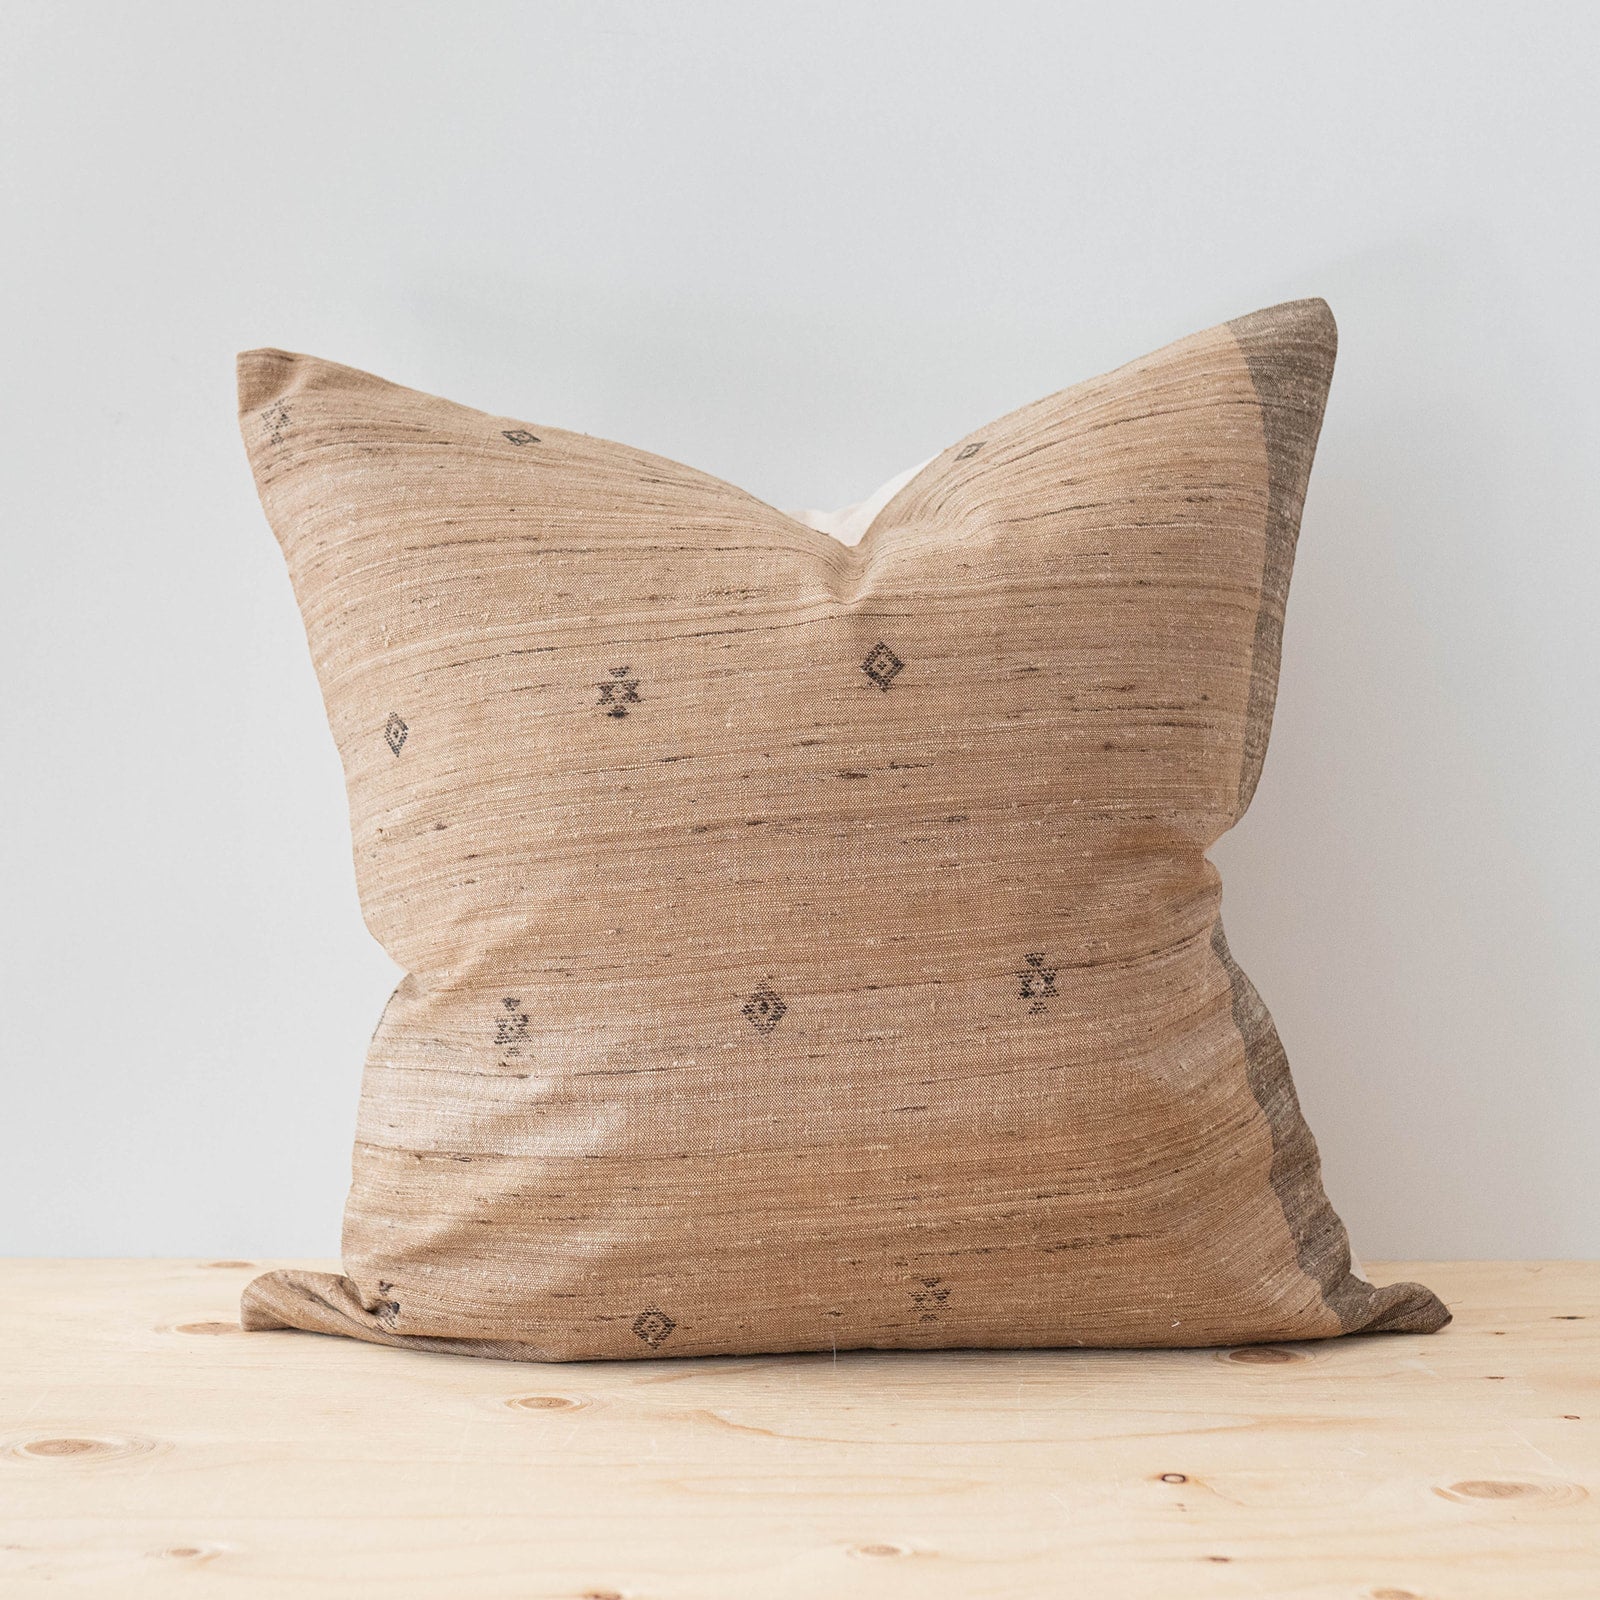 Mocha Tussar Pillow Cover - Rug & Weave